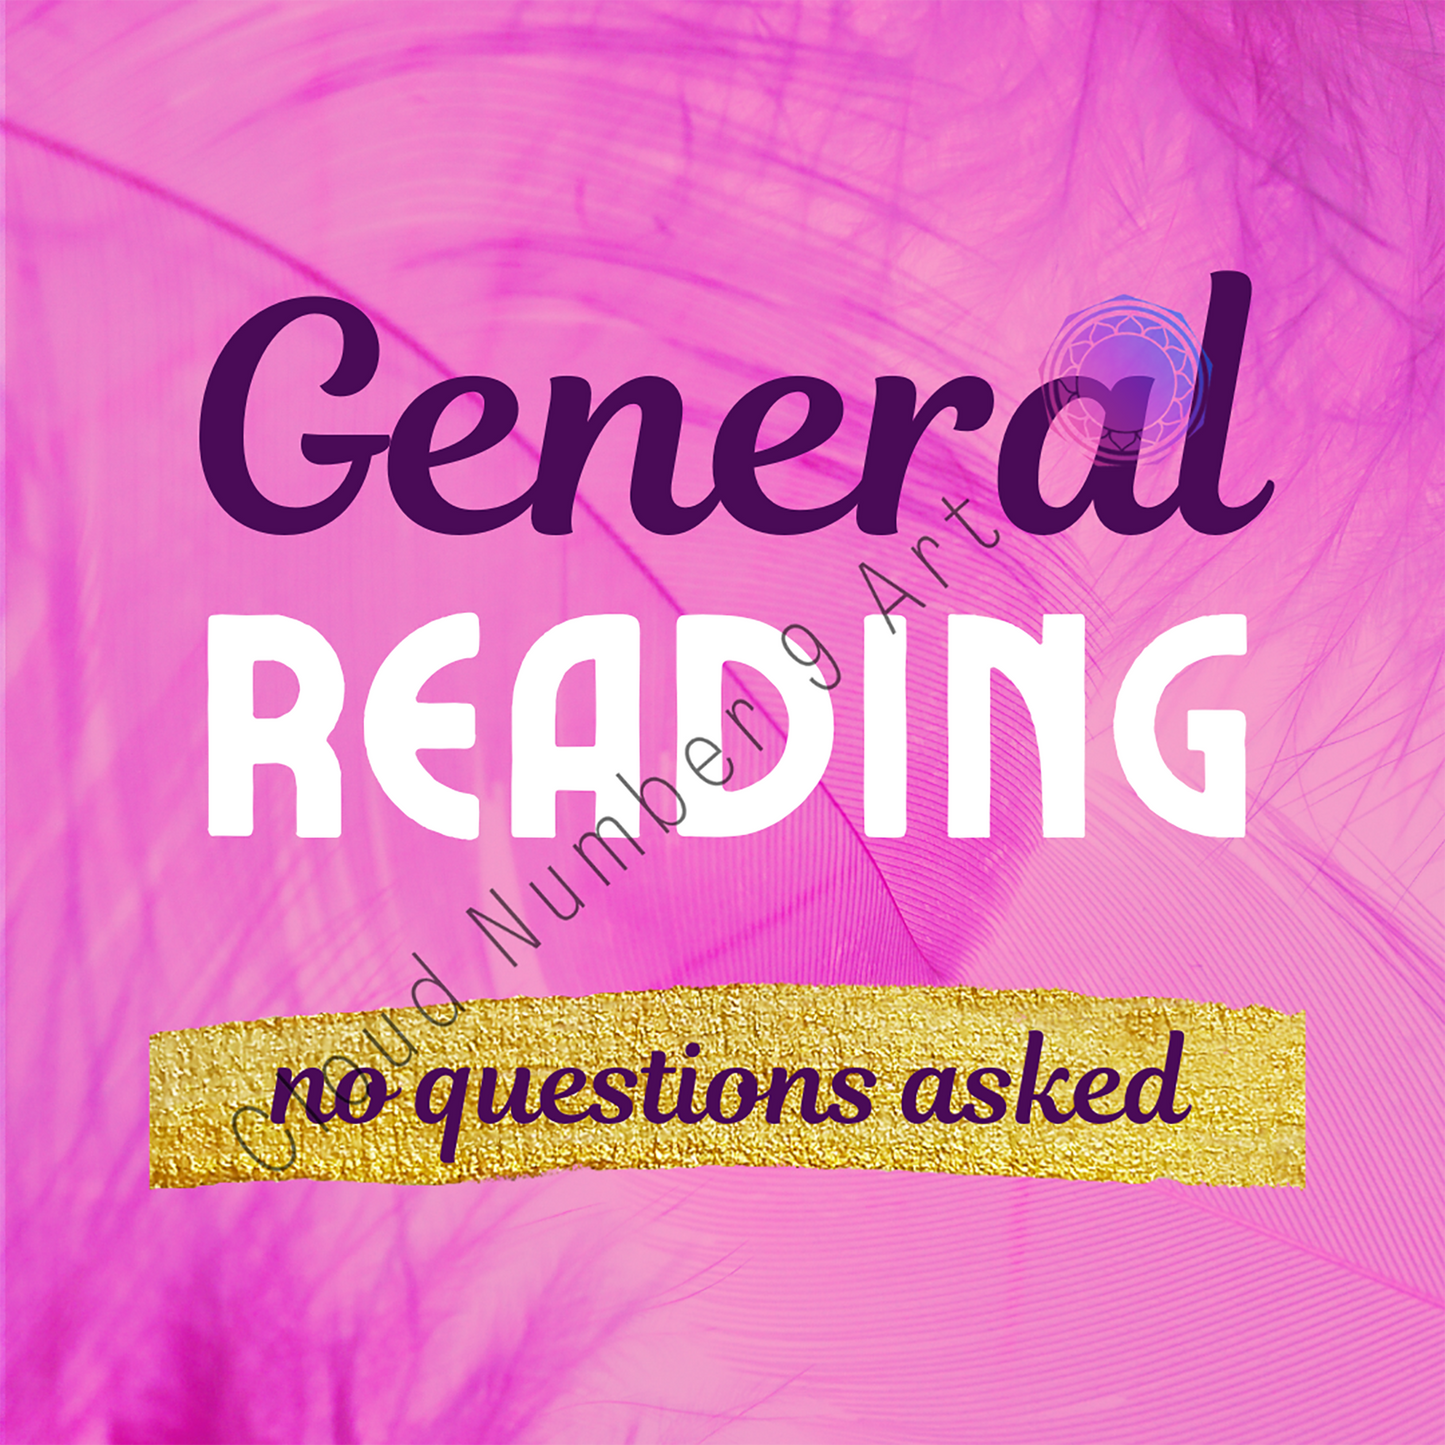 Blind Reading without Questions | Same Day Reading | Within 24 Hours From Purchase | Spiritual Advice | General Reading